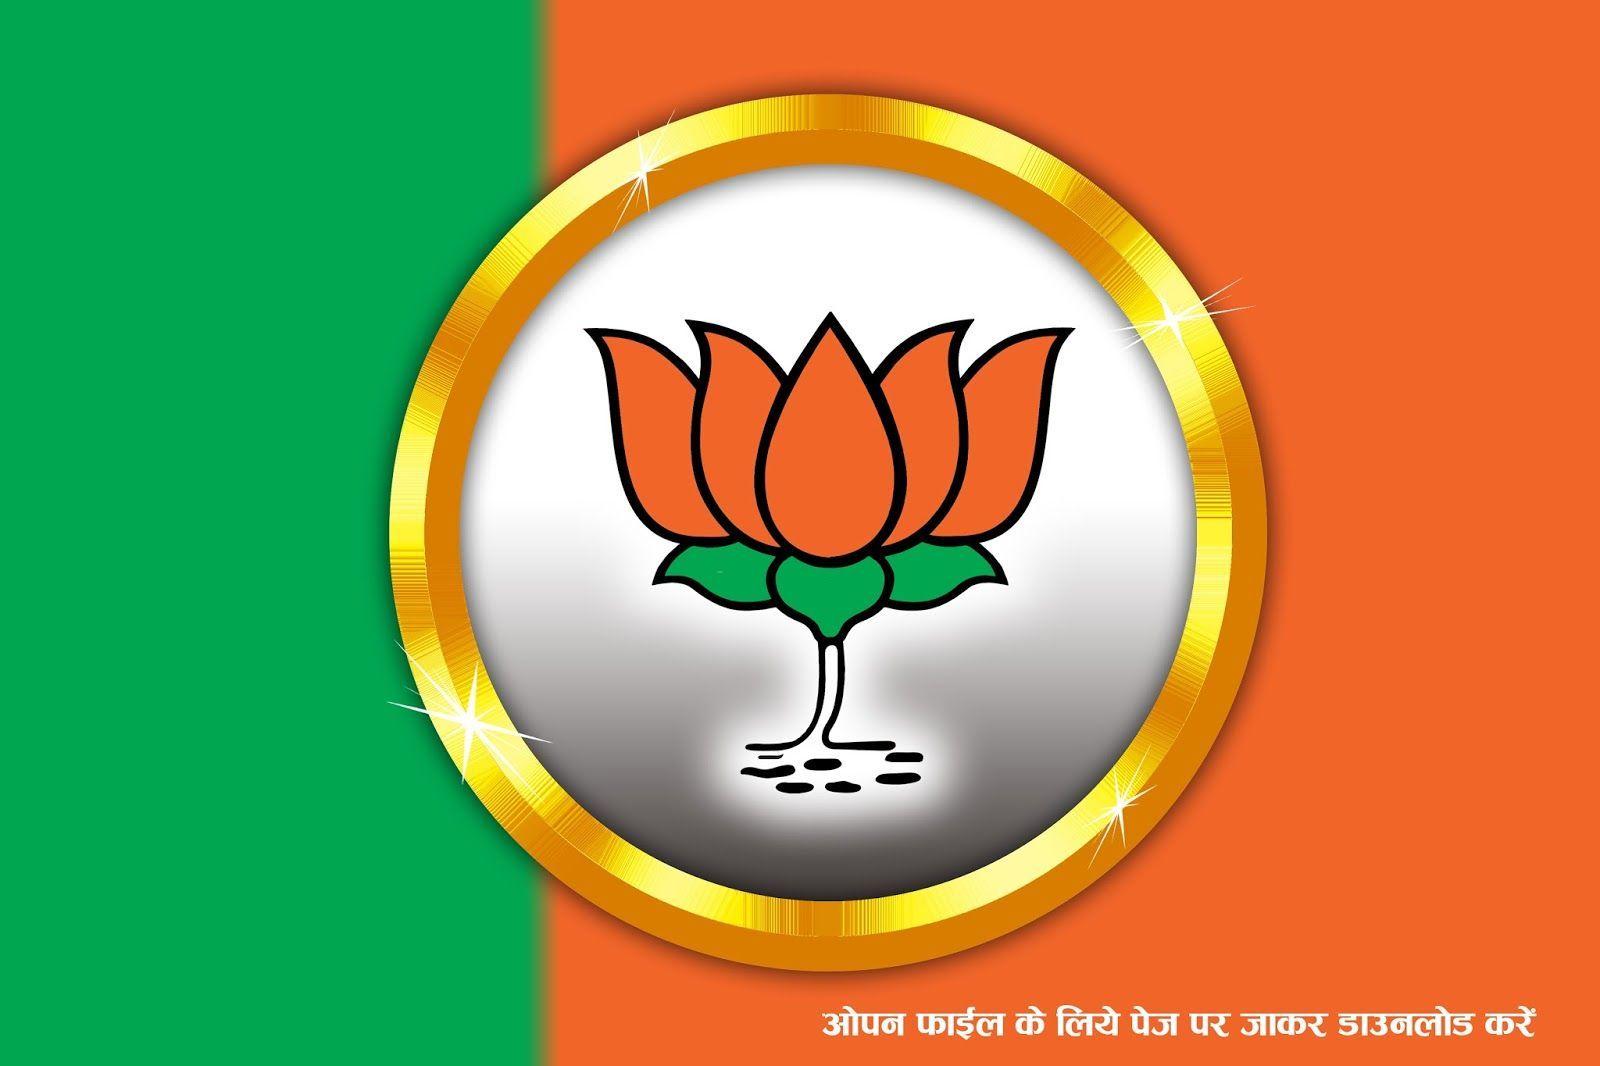 BJP announces candidates for municipal bypolls in Delhi see list   IBTimes India